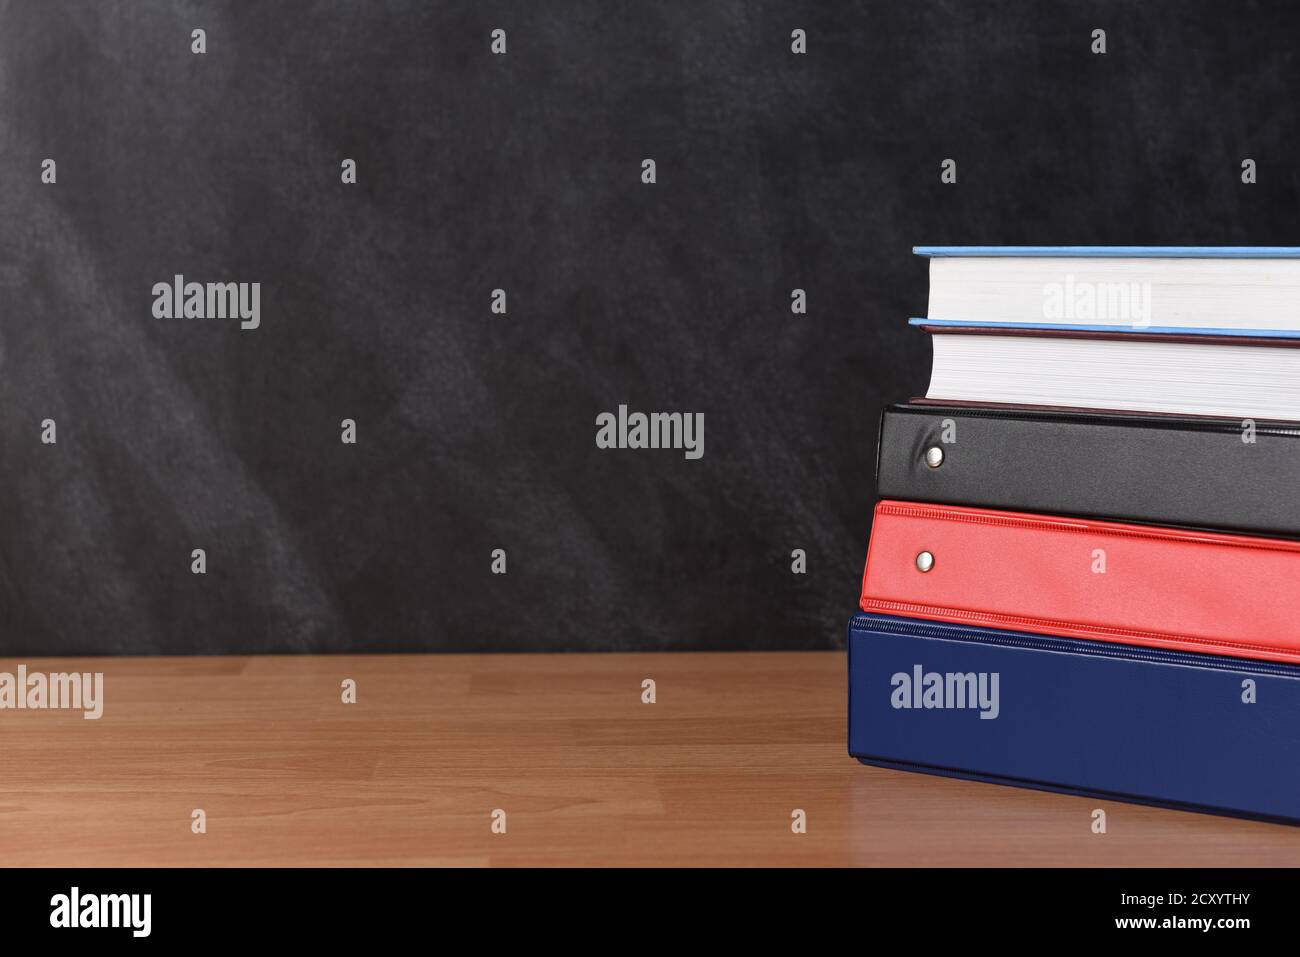 A stack of three different binders on desk in front of black board with two books. Stock Photo